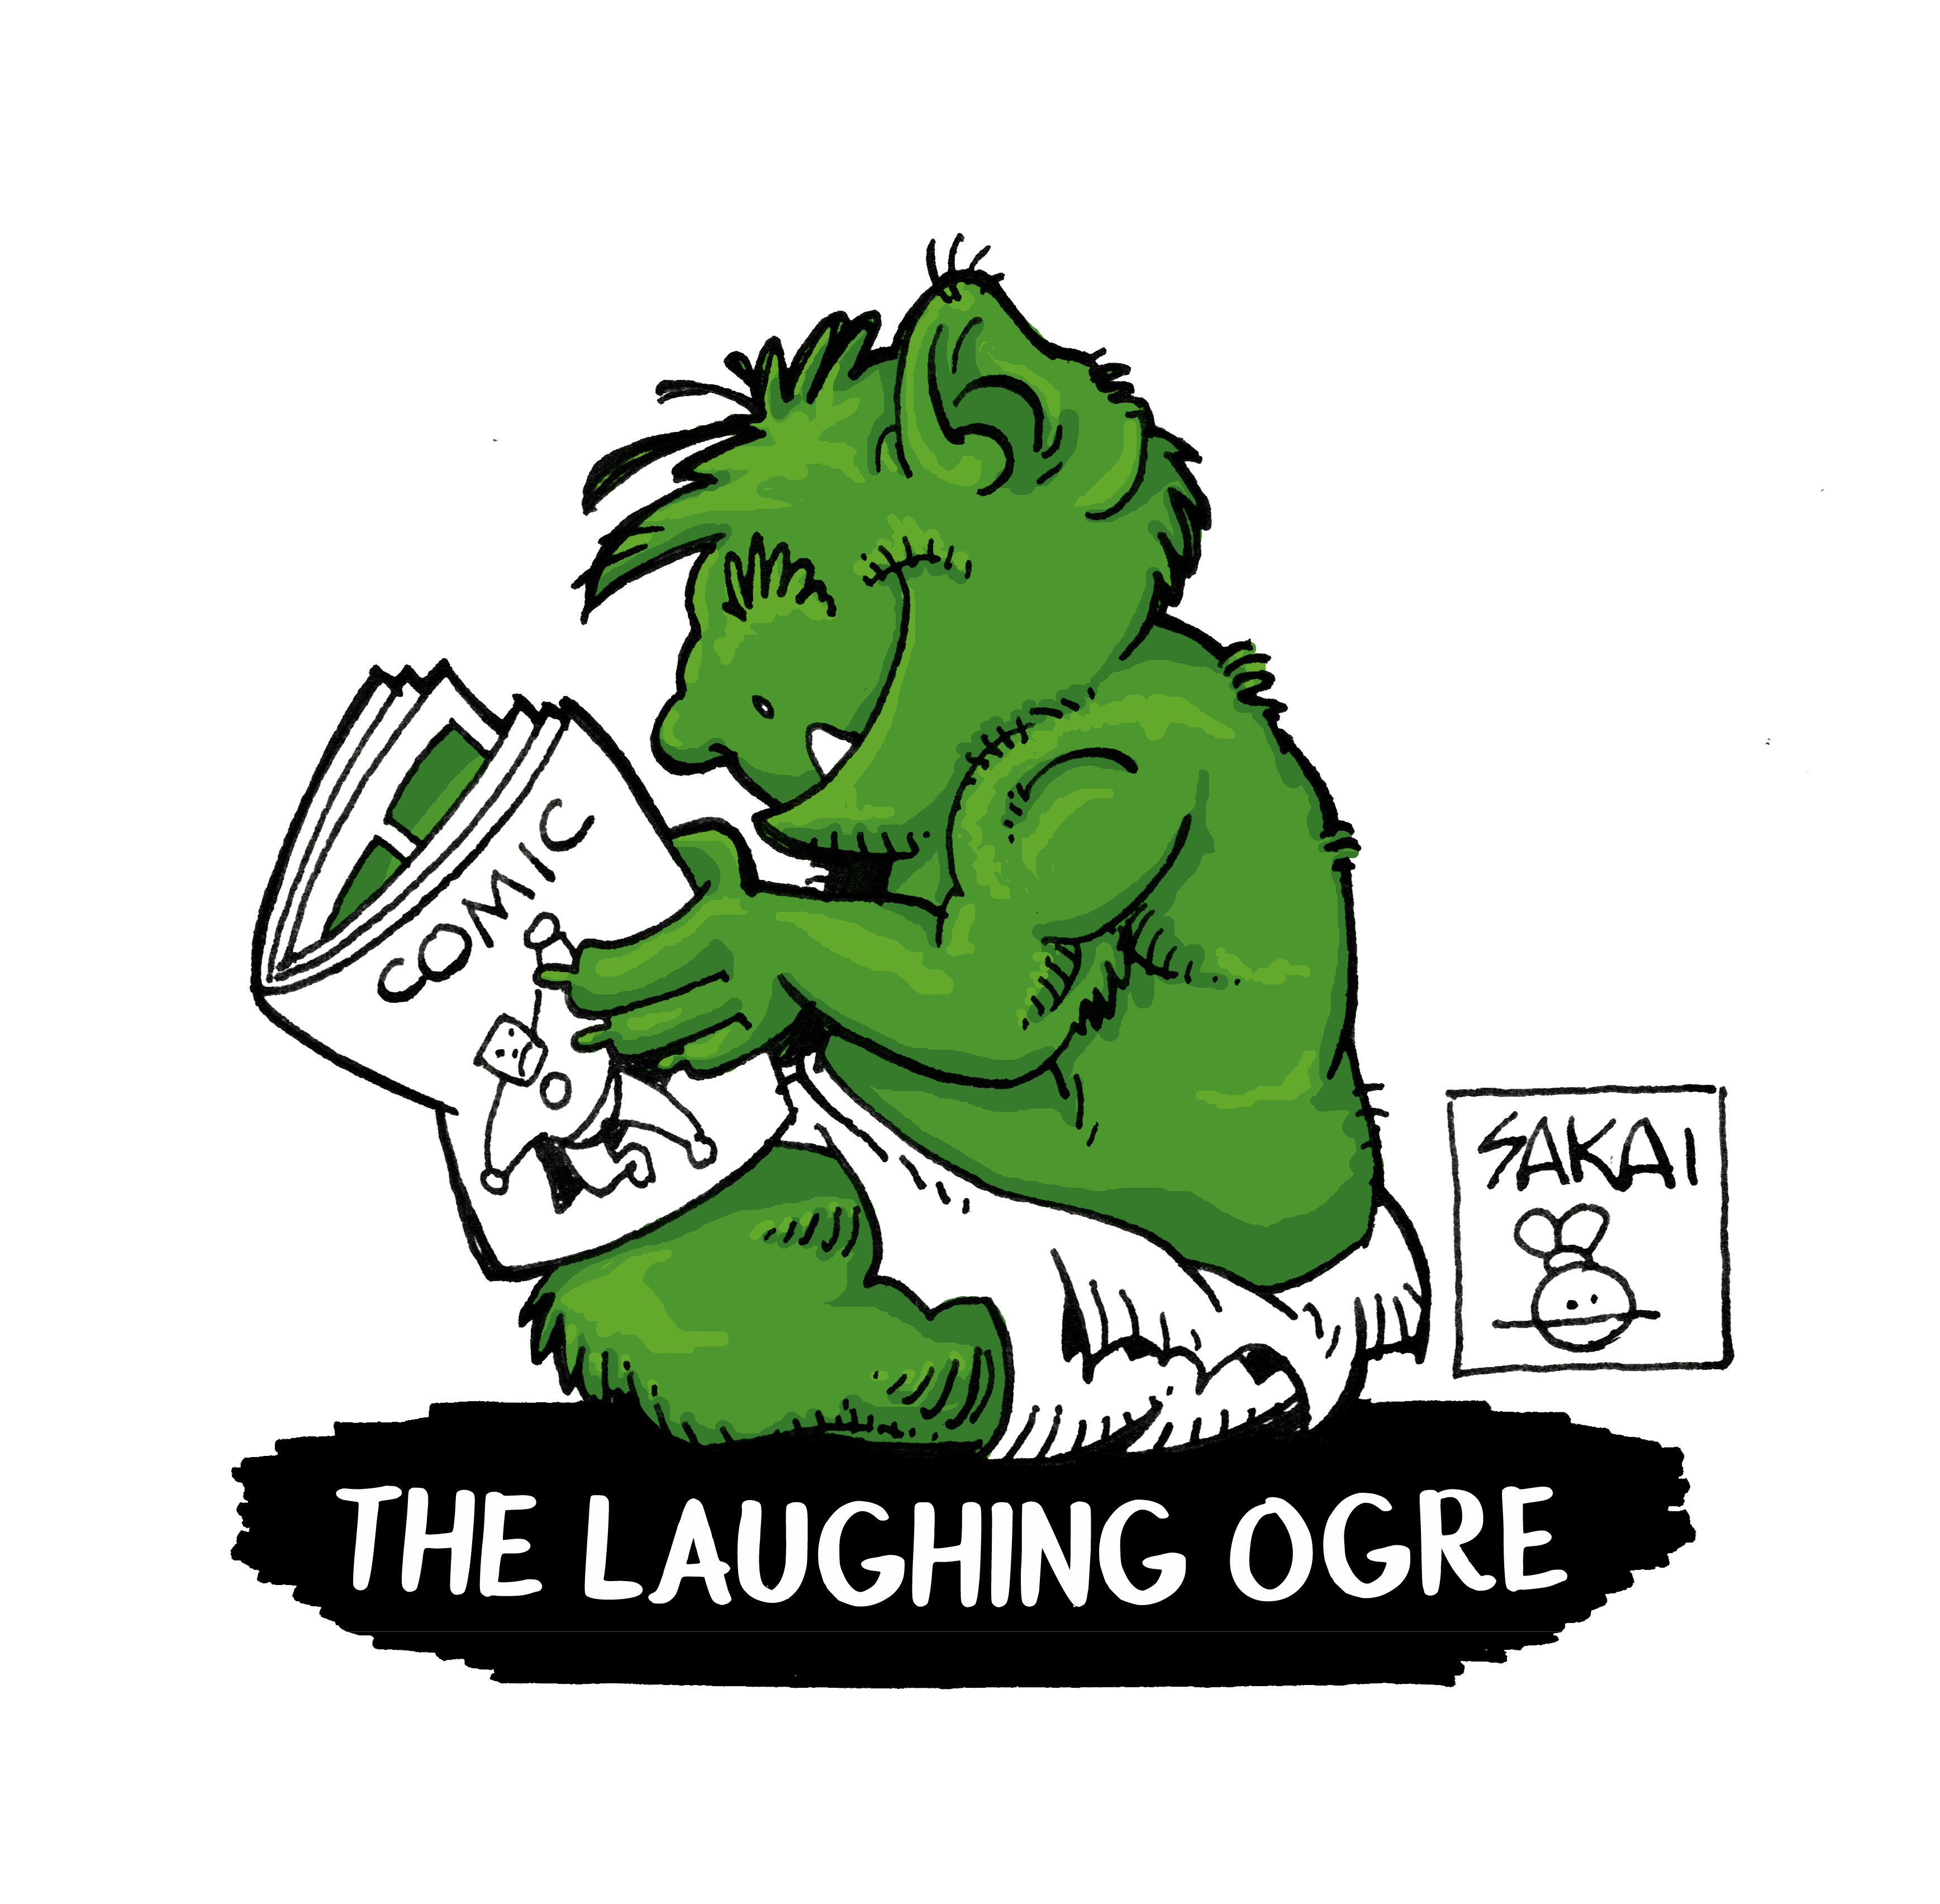 THE LAUGHING OGRE